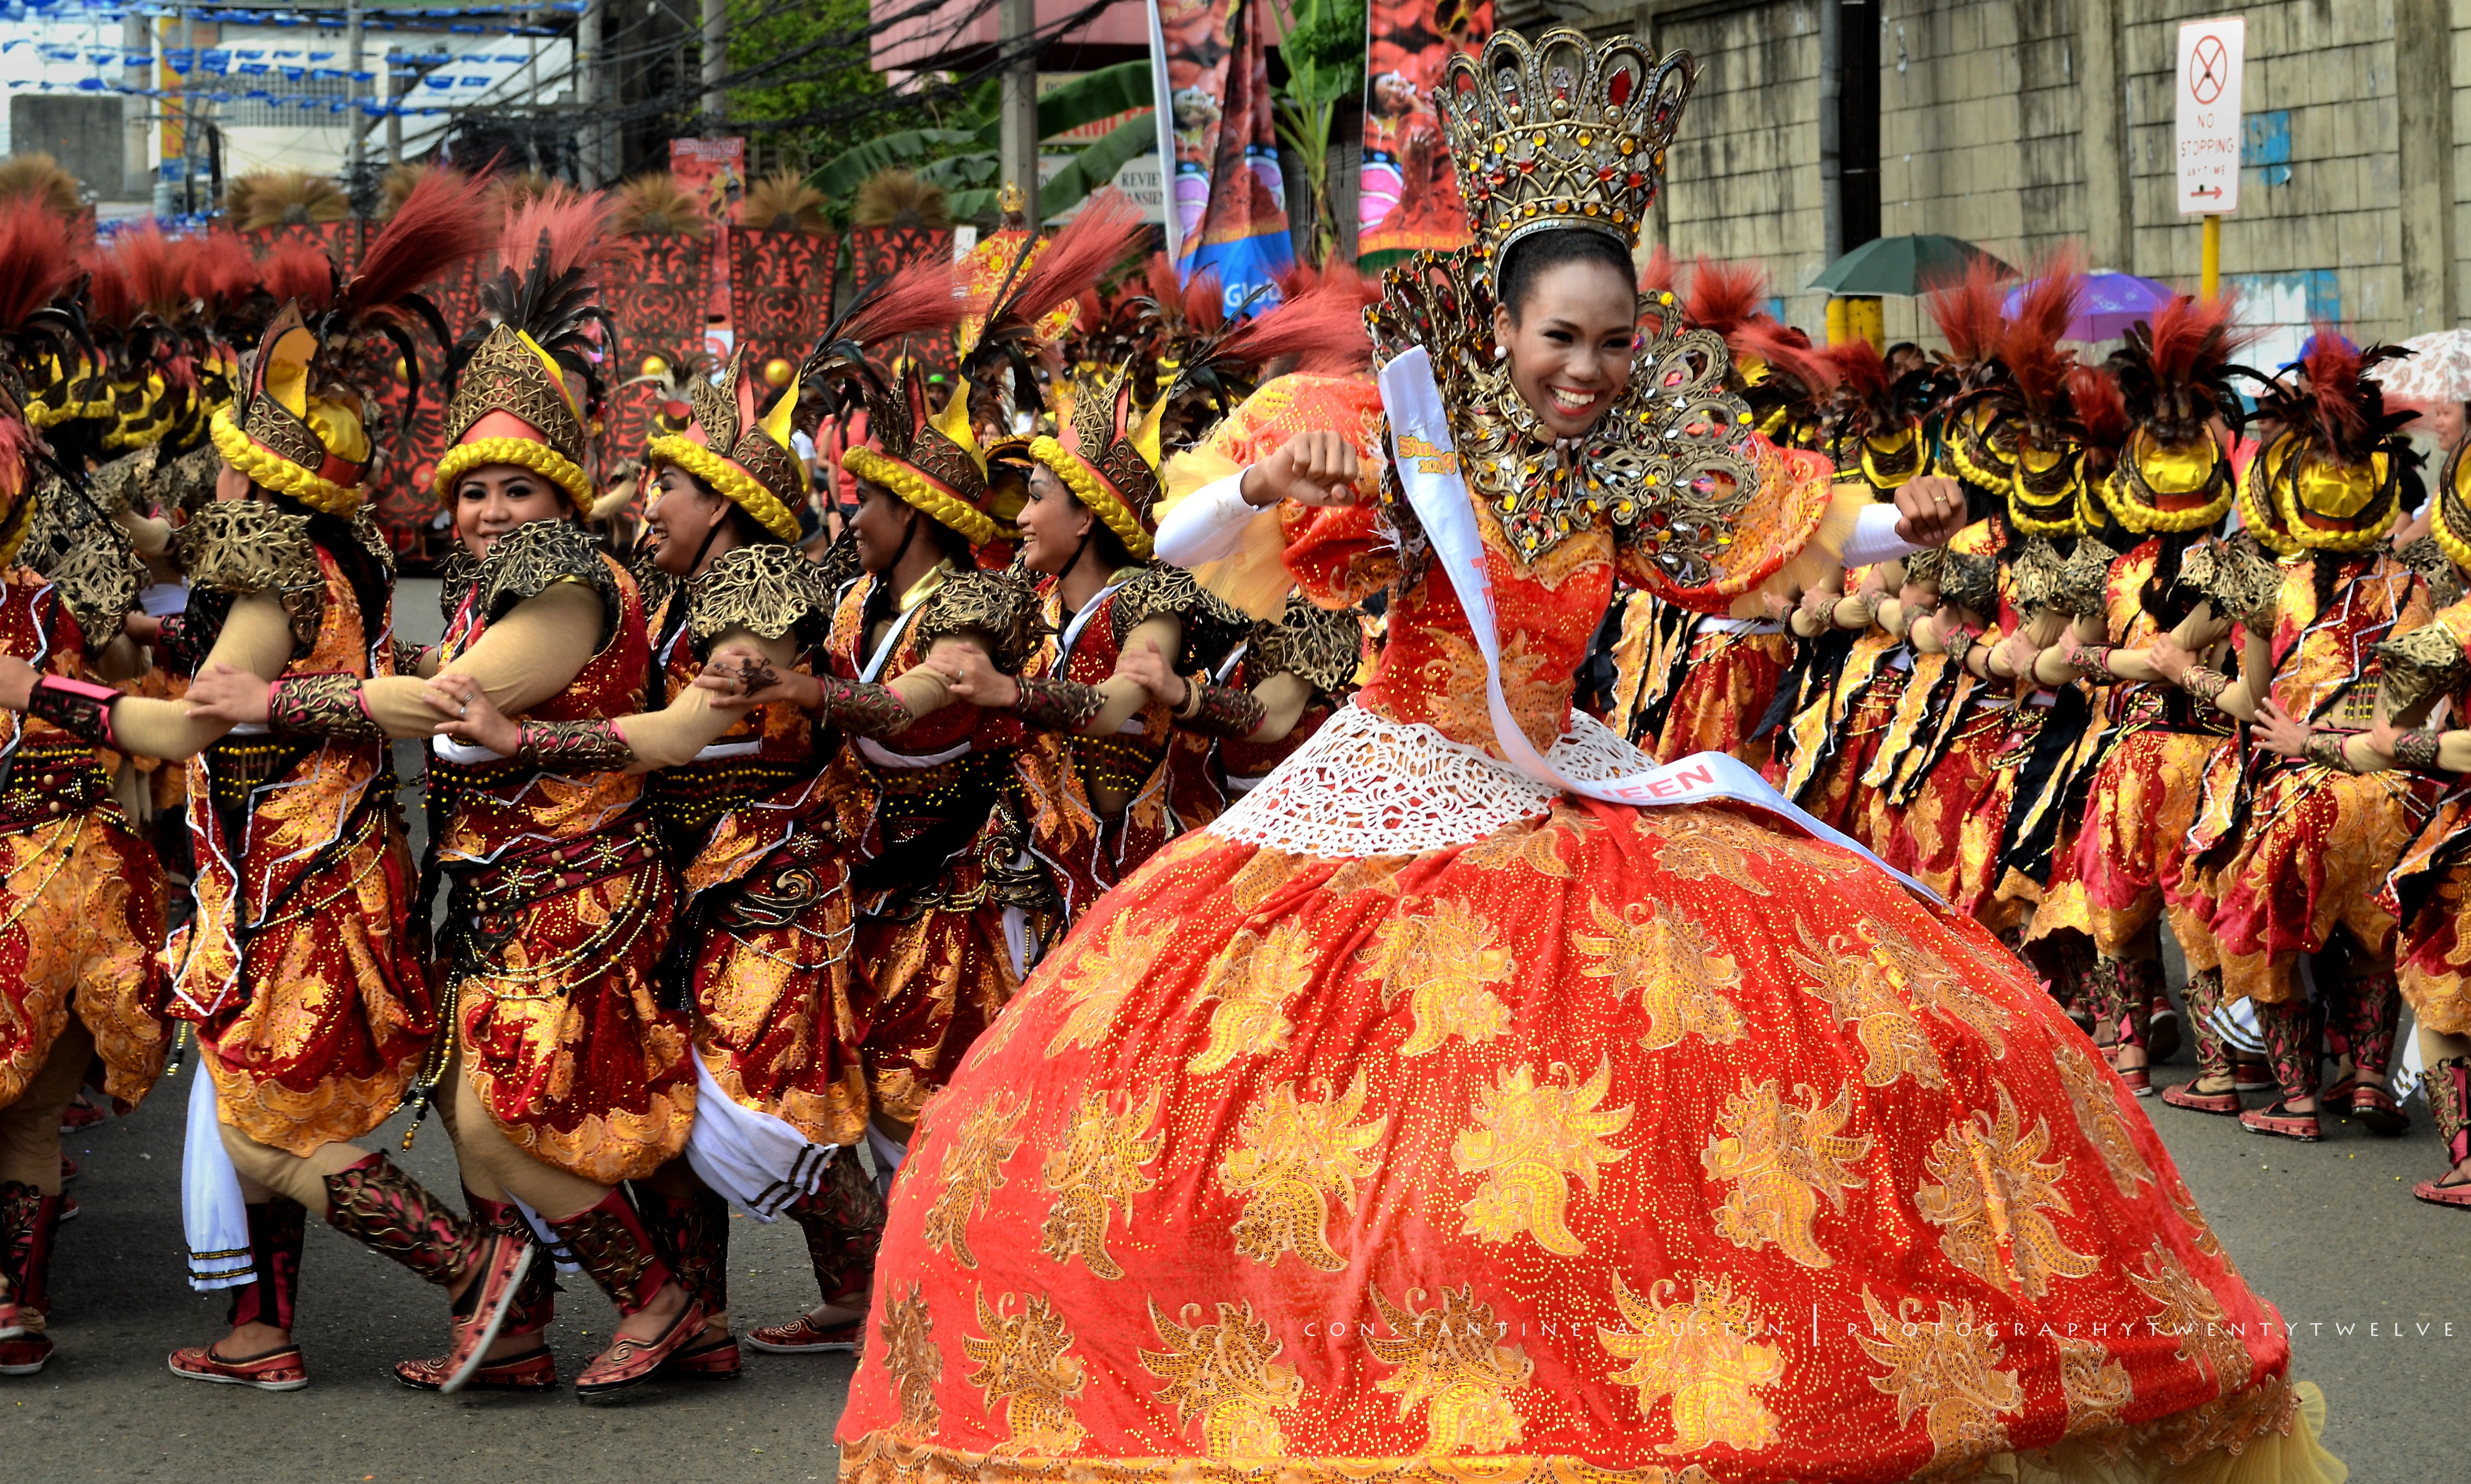 Dancers at Grand Parade during Sinulog Festival in the Philippines